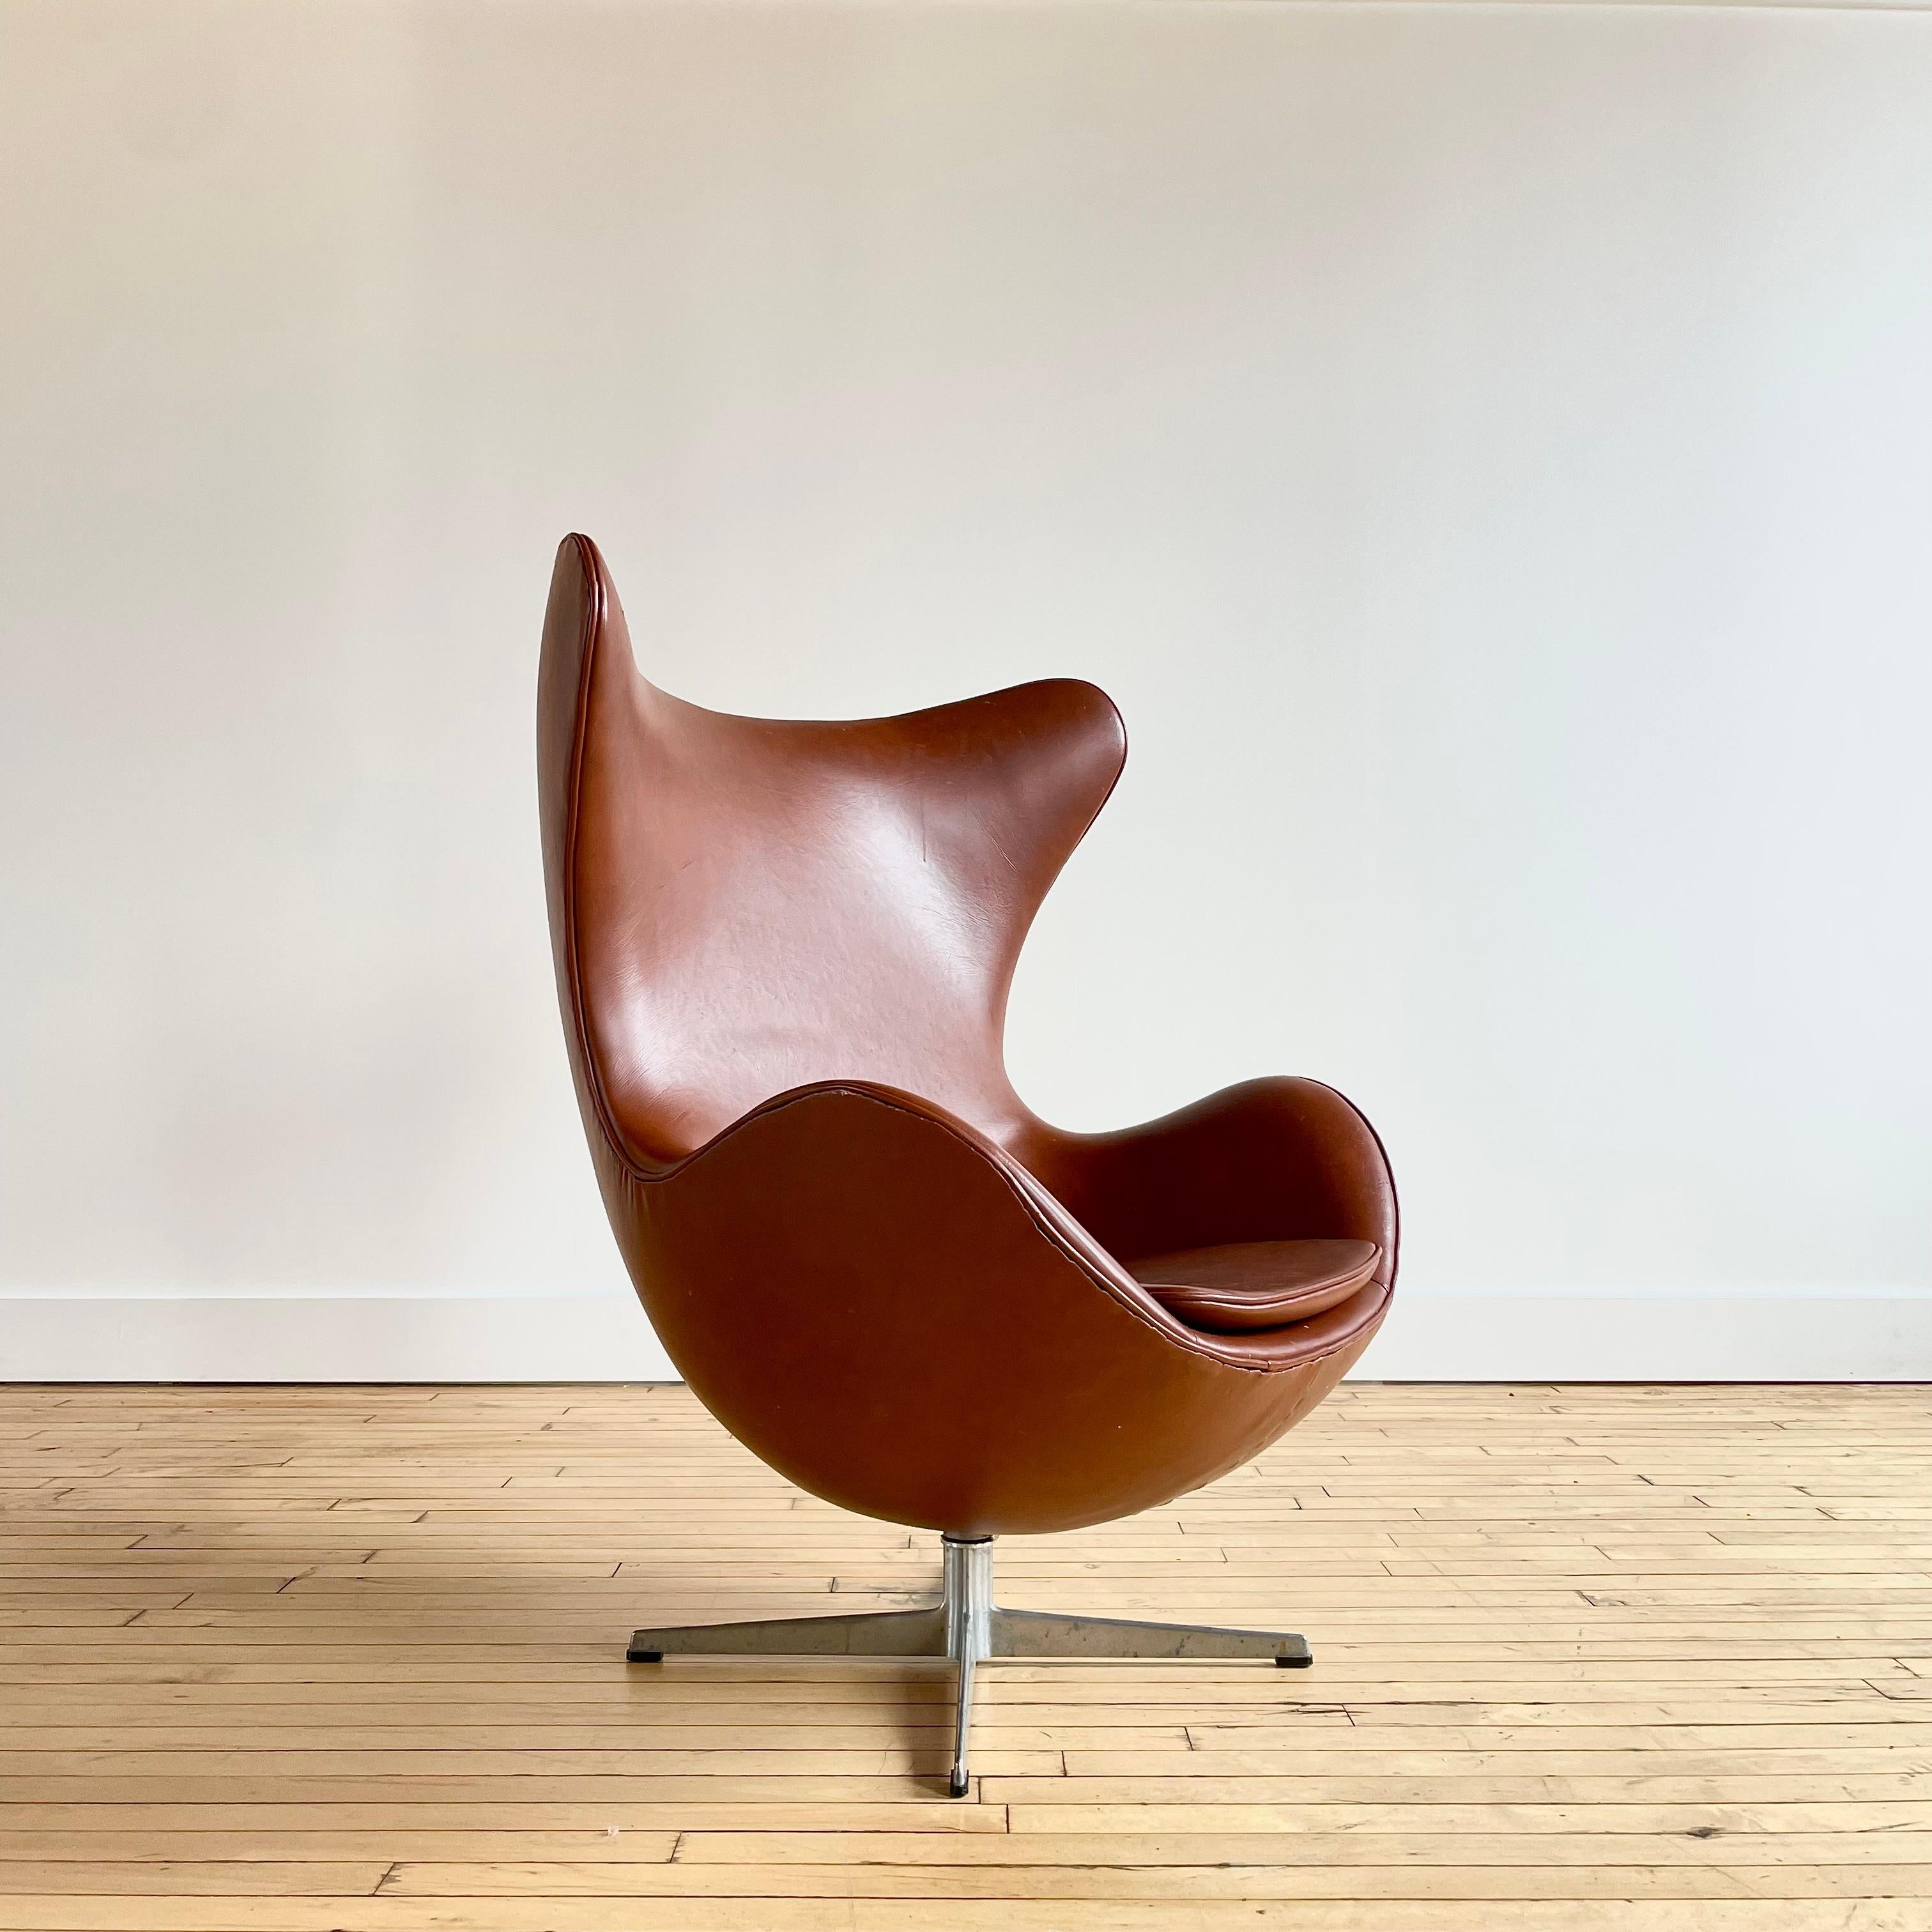 Authentic 1960s example of the iconic Egg Chair by Arne Jacobsen. Fritz Hansen signature (FH Made in Denmark) is etched into the base. 

Chair is in fair but presentable vintage condition. 

This chair features cognac upholstery in what appears to